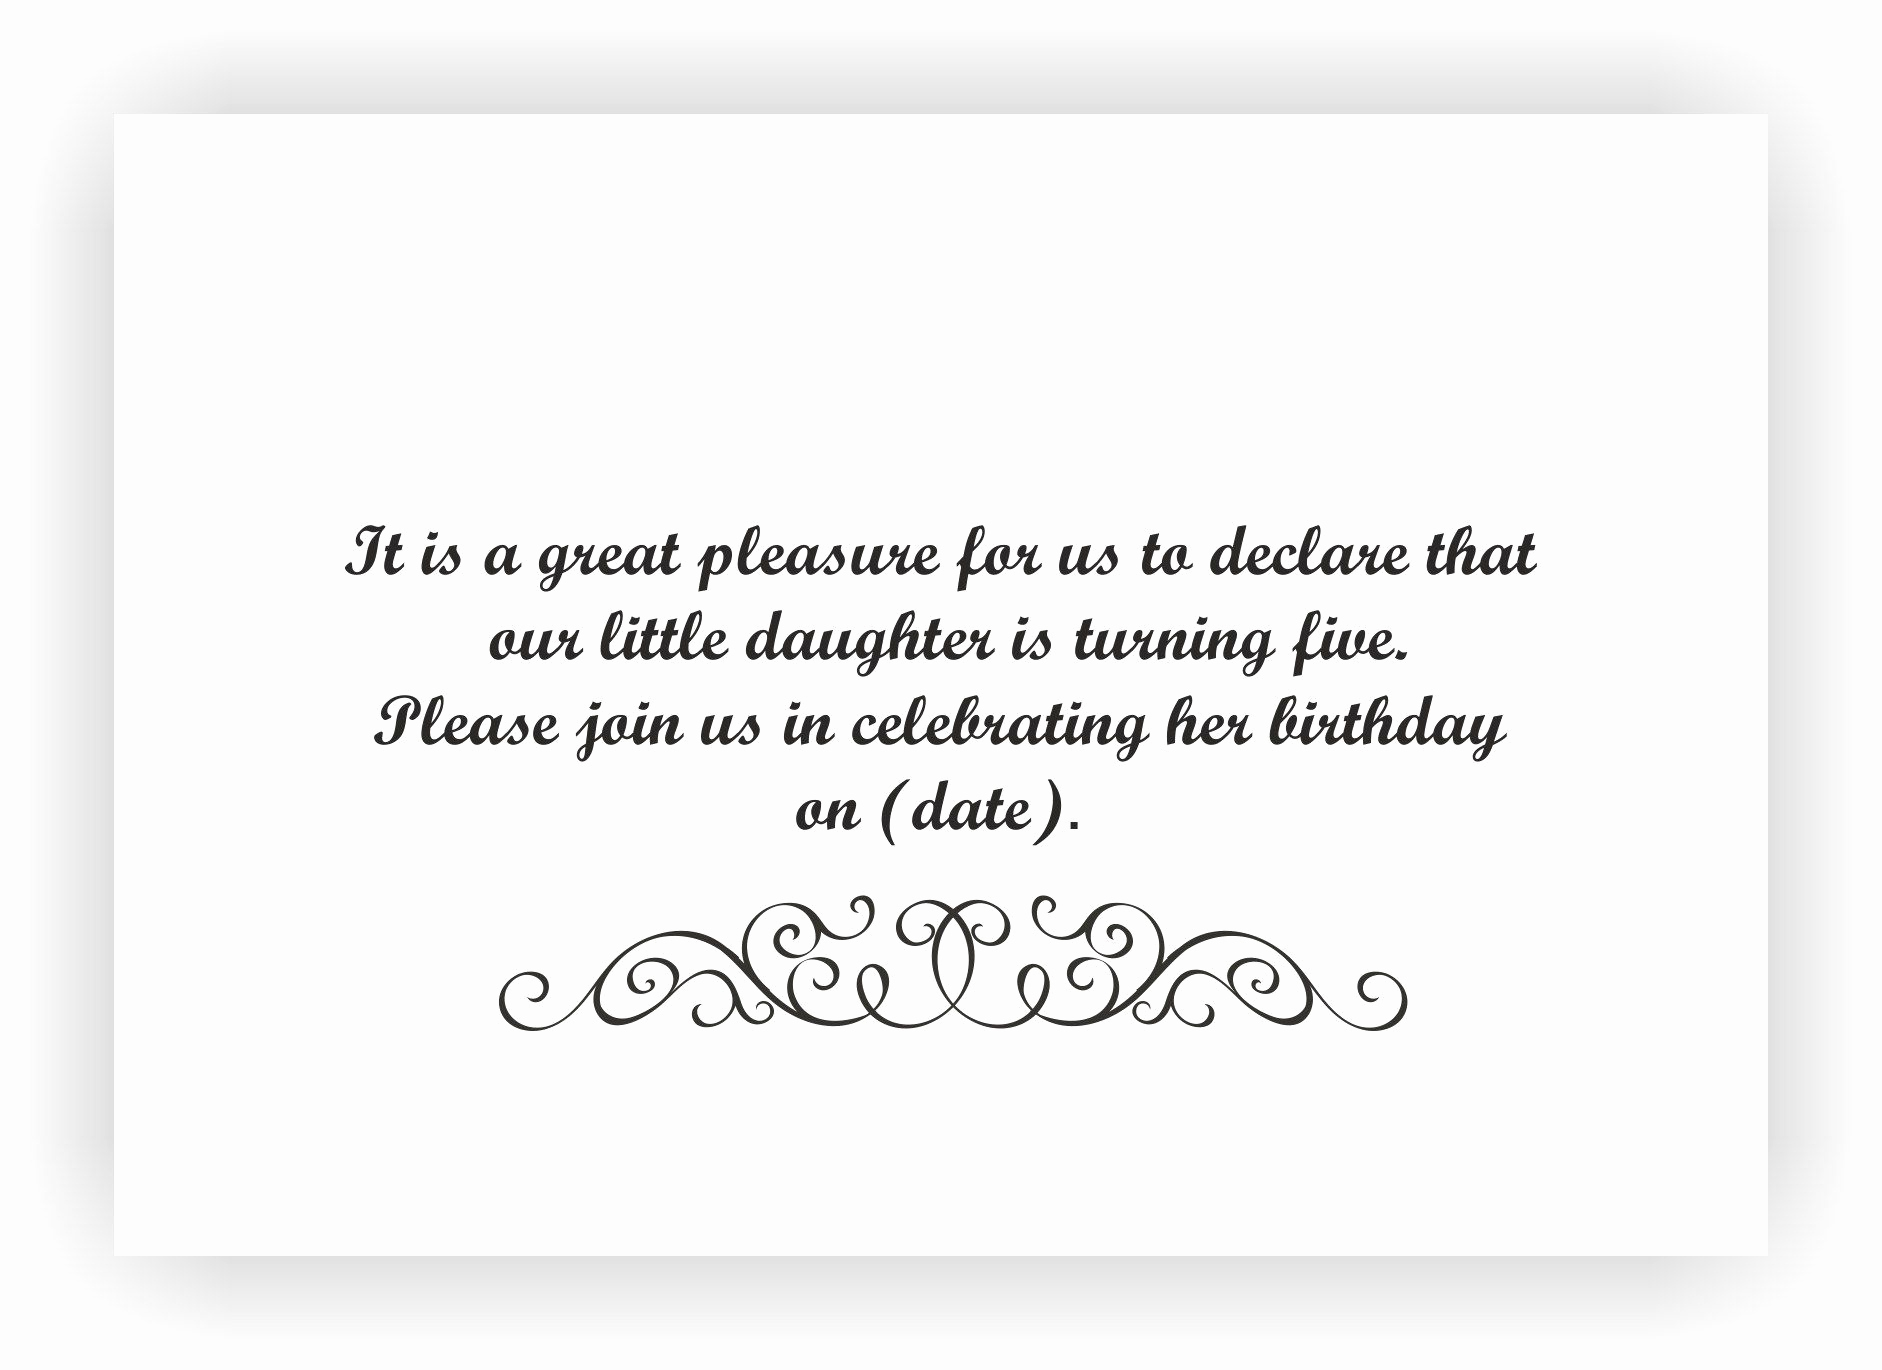 Birthday Invitation Message for Adults Elegant Birthday Party Invite Messages